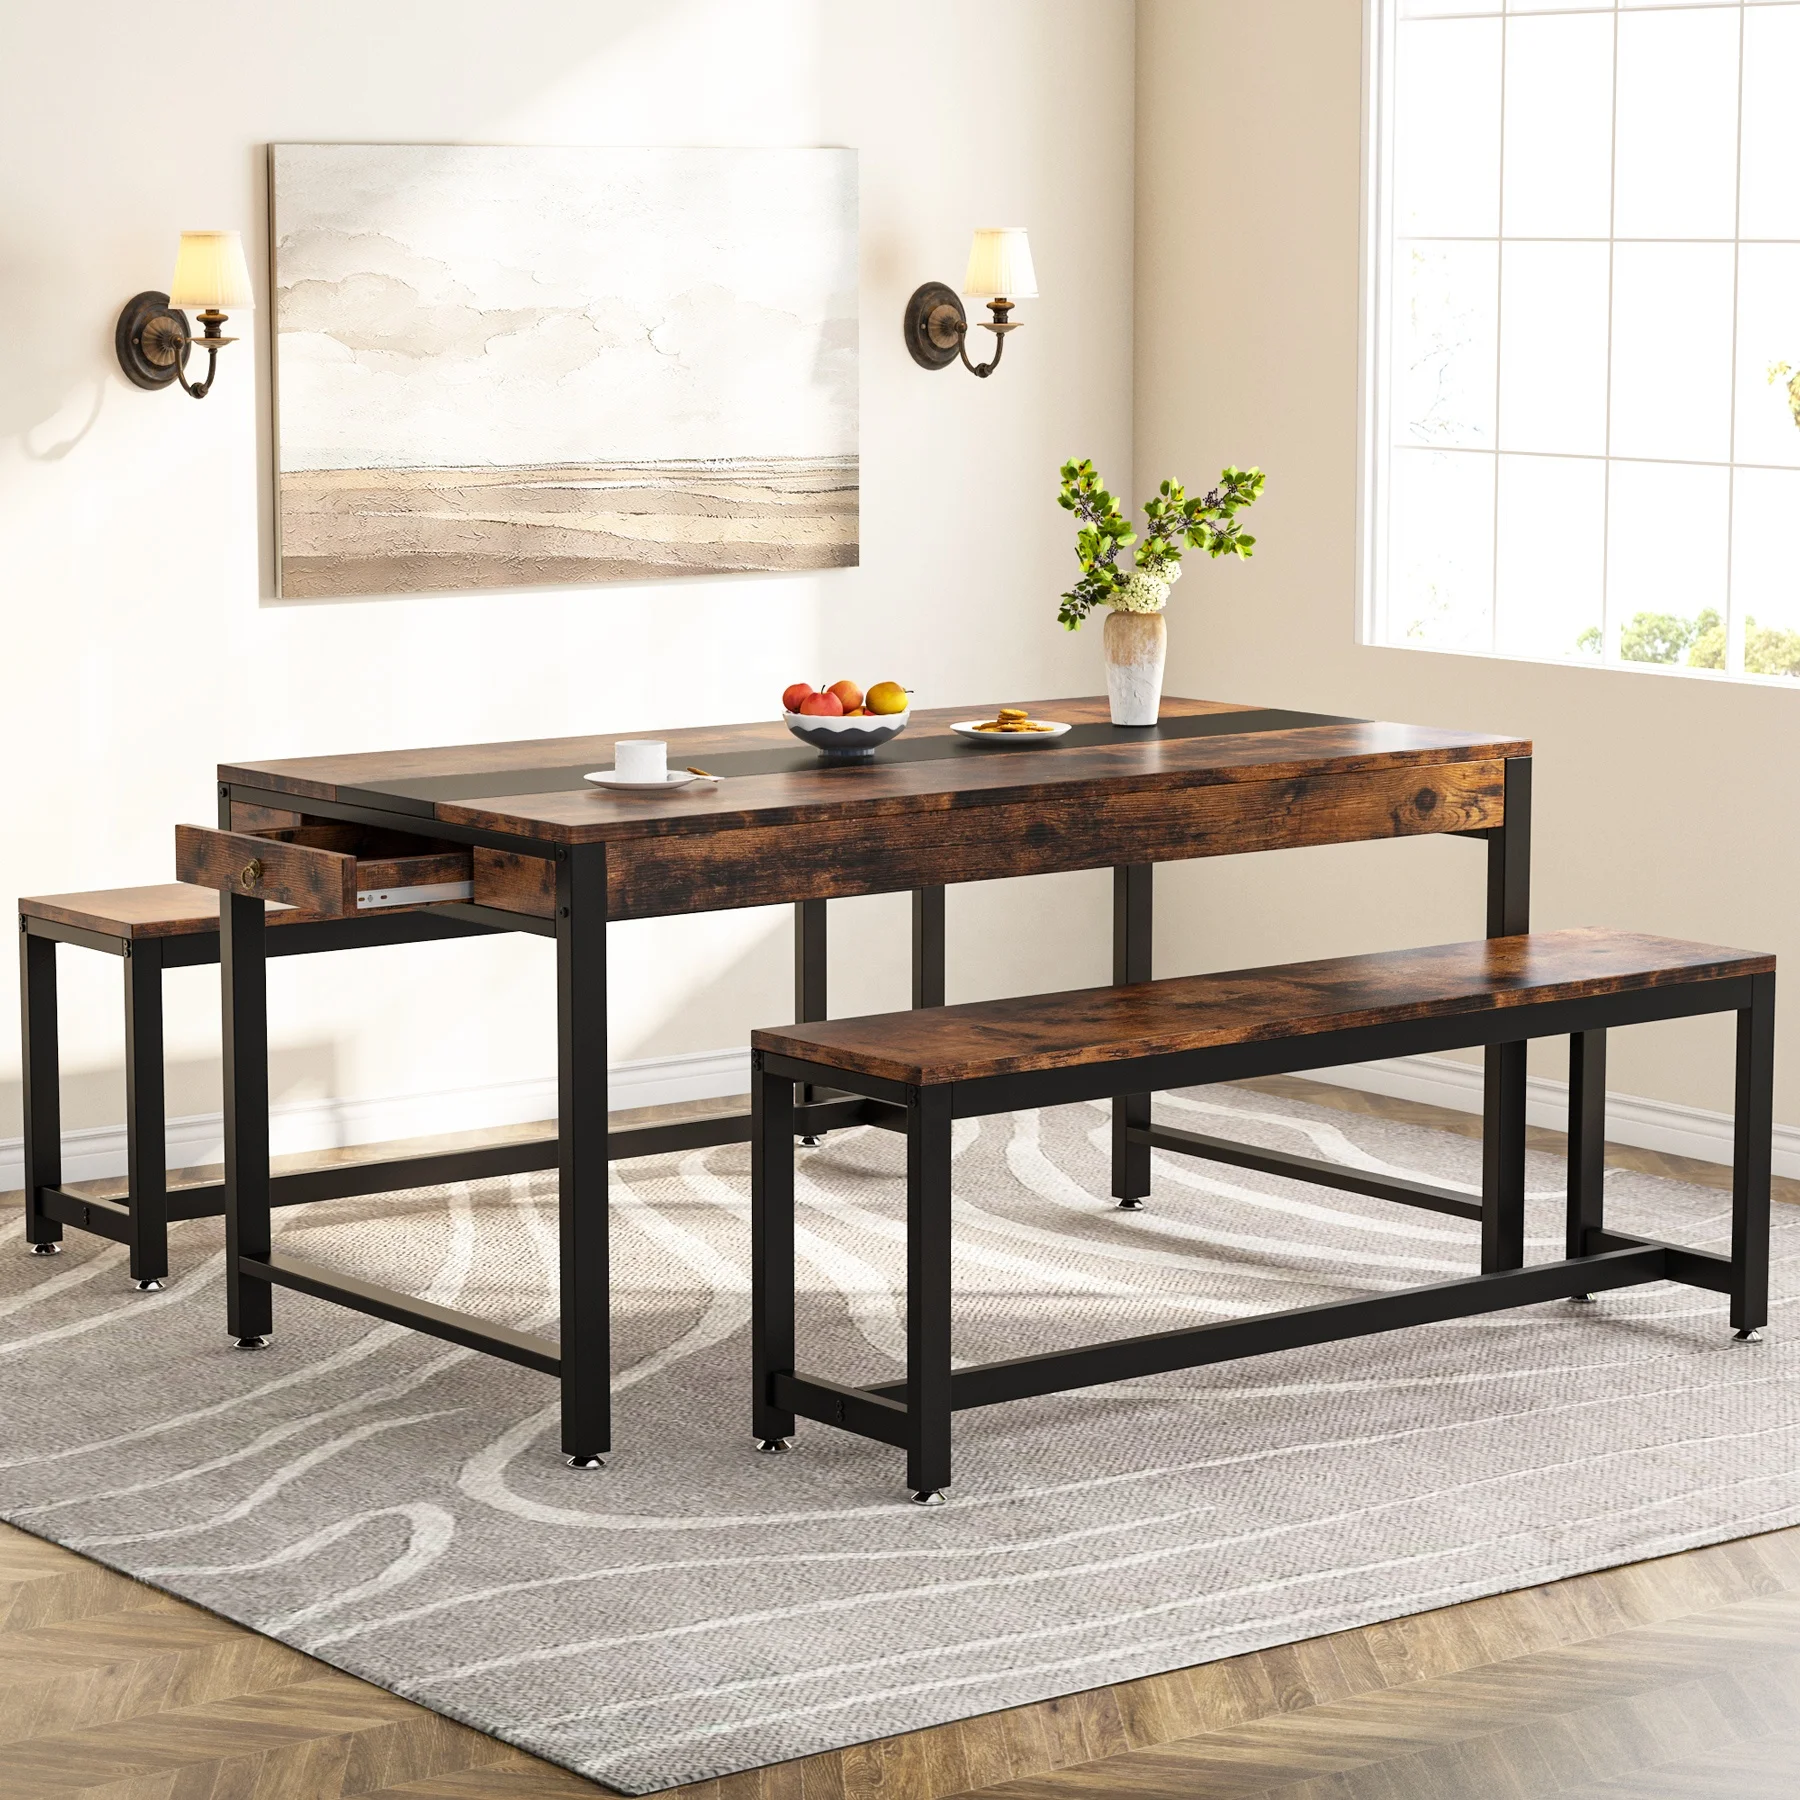 Tribesigns American High End 63 Inch Home Furniture Dining Room Kitchen Set with Bench Sided Drawer Metal Frame Dining Table